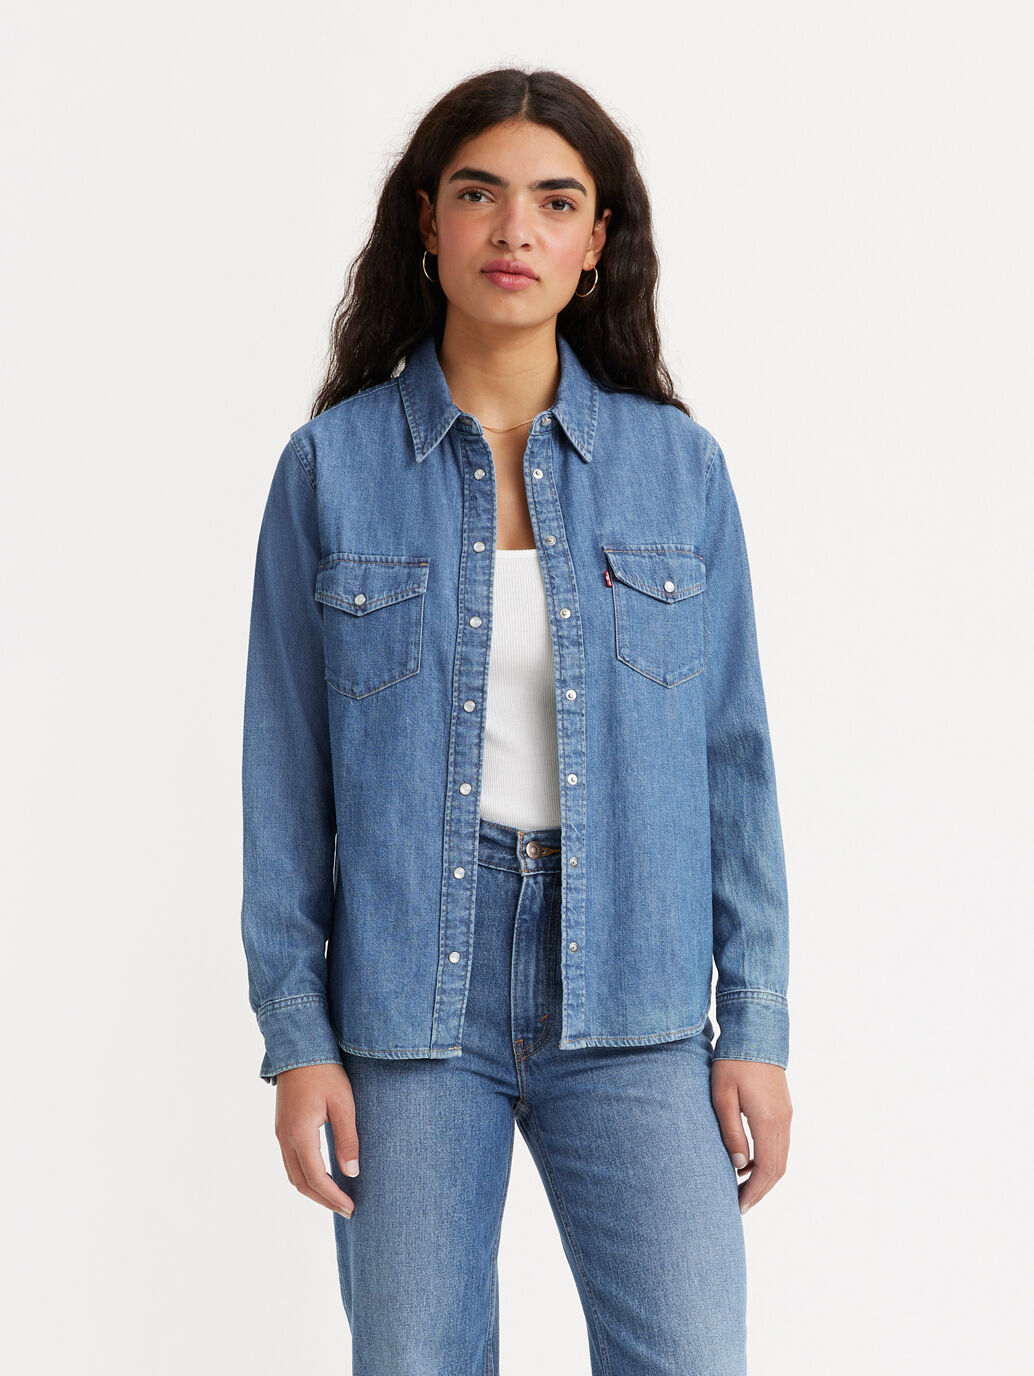 Buy LEVIS Indigo Solid Cotton Collared Women's Casual Shirt | Shoppers Stop